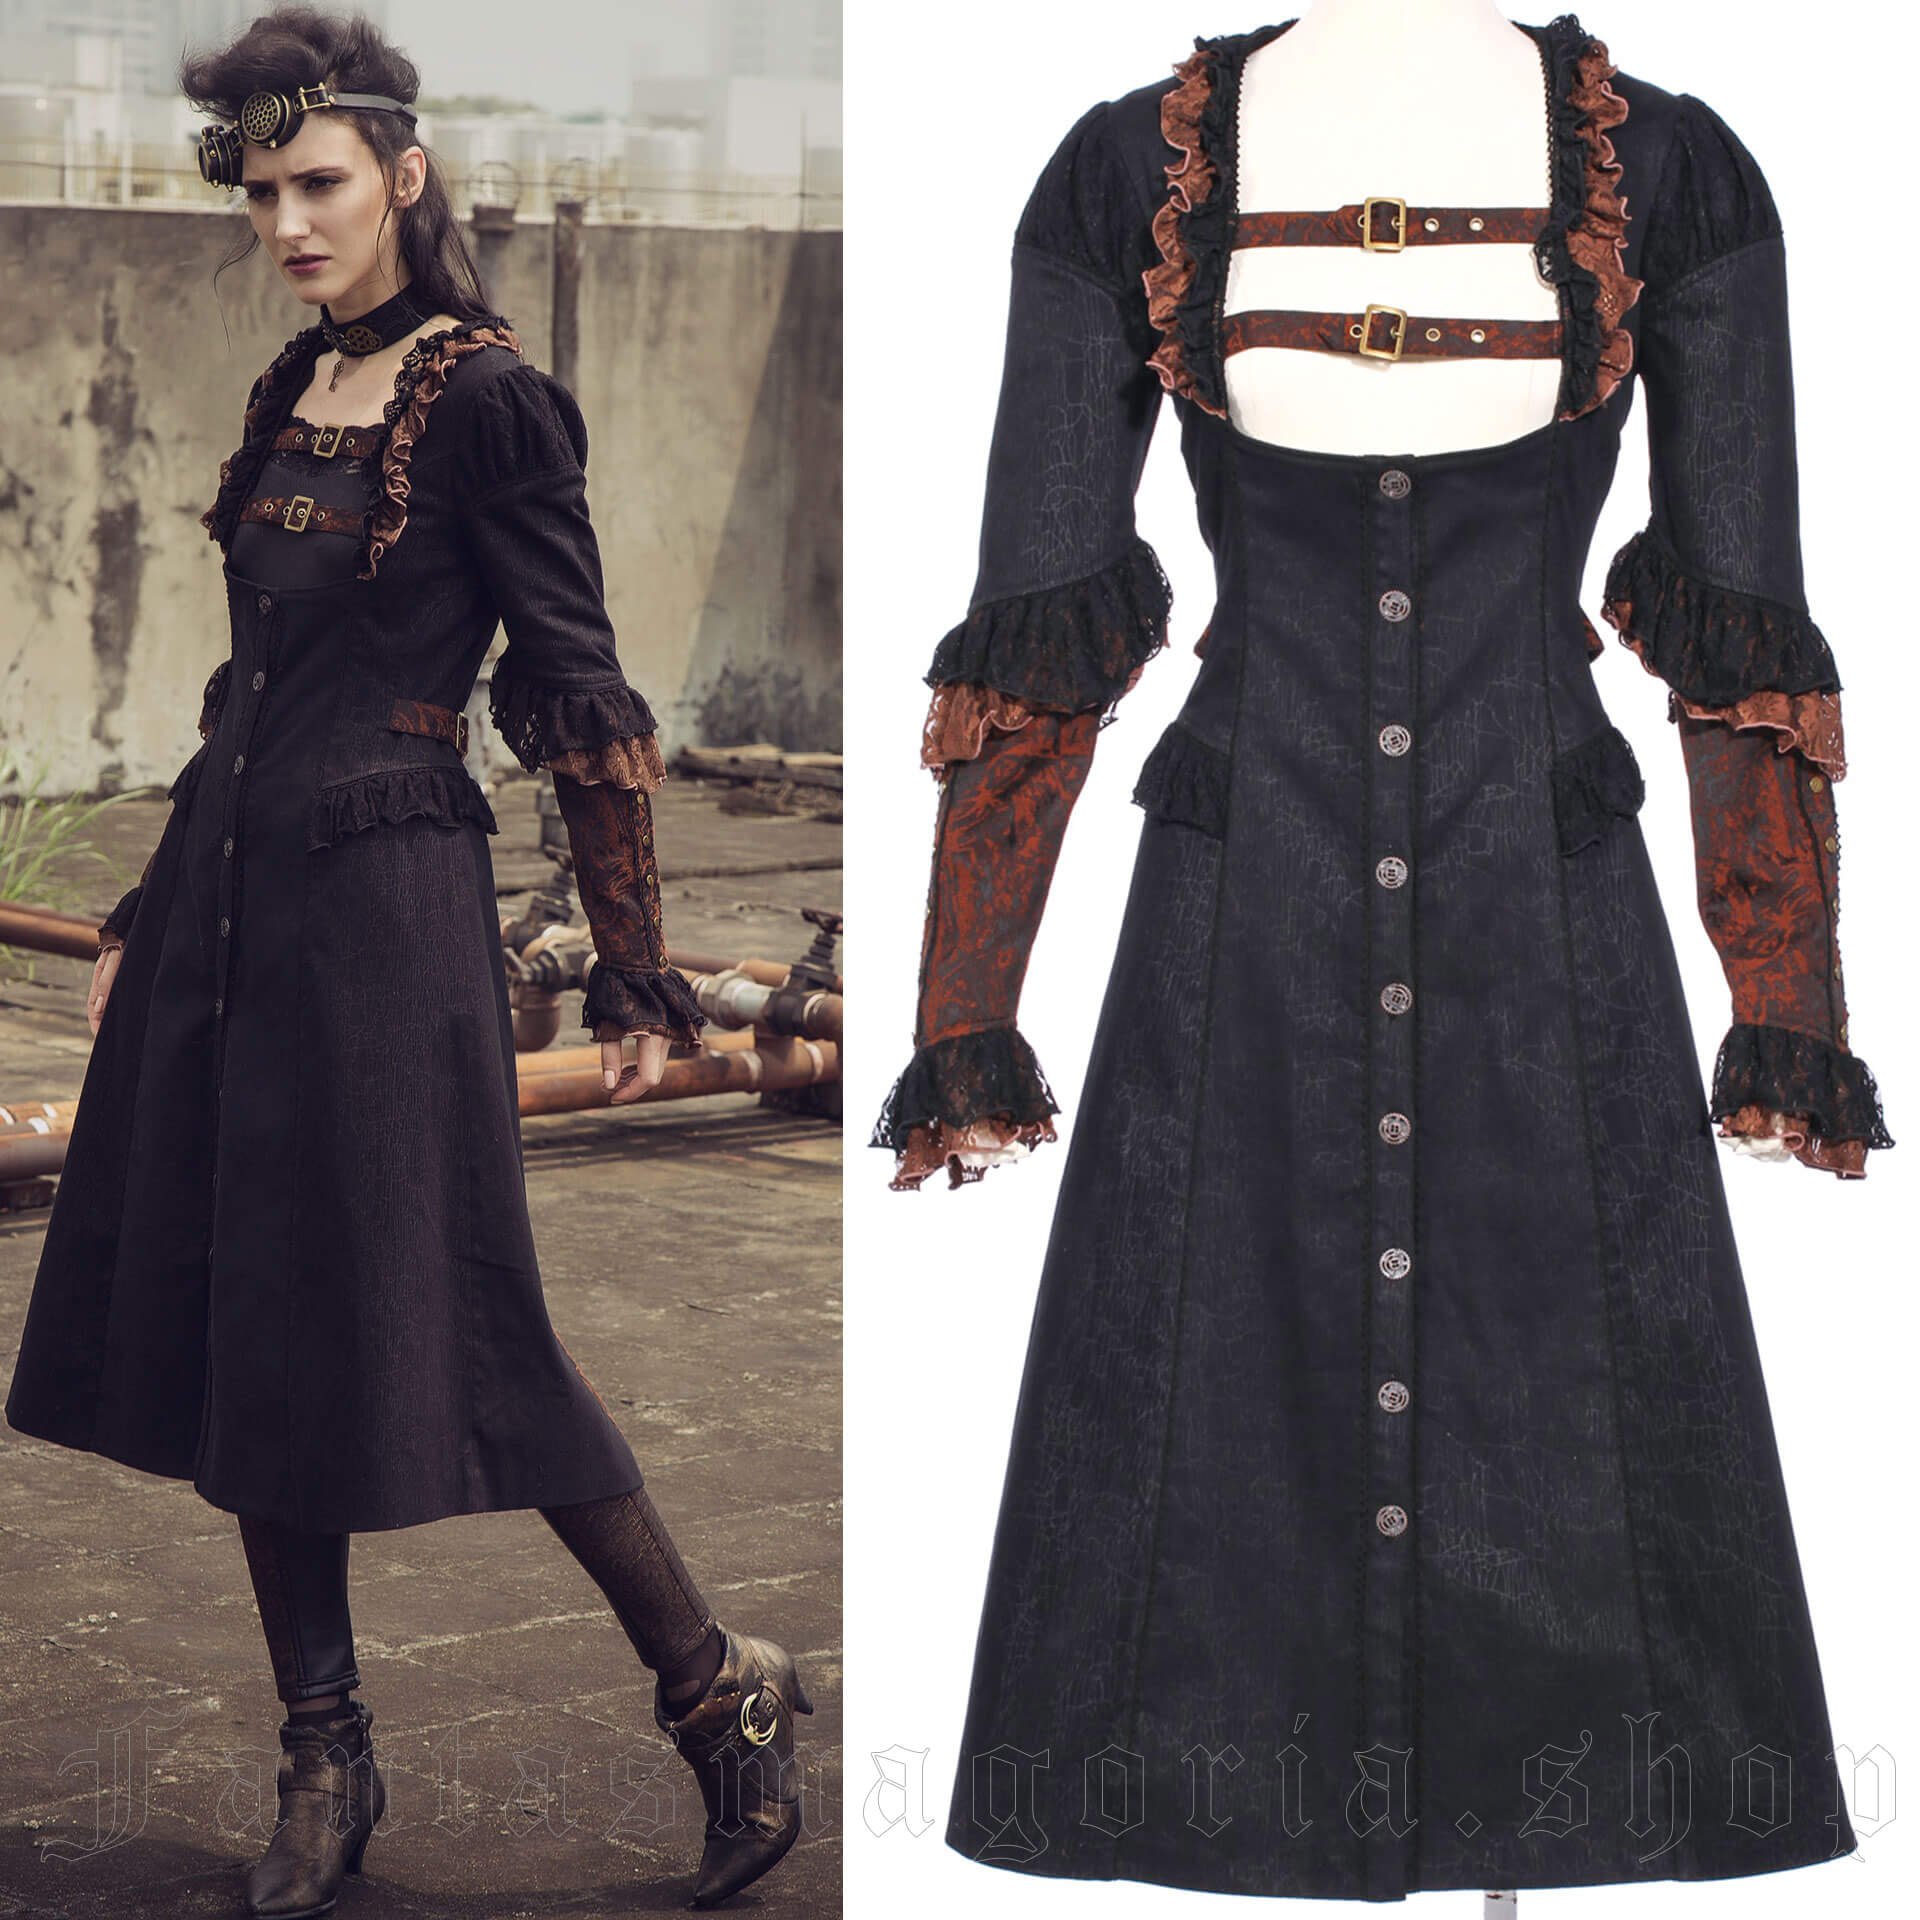 Brandy Polishing Perforate Steampunk and Neo-Victorian Gothic women`s black and brown